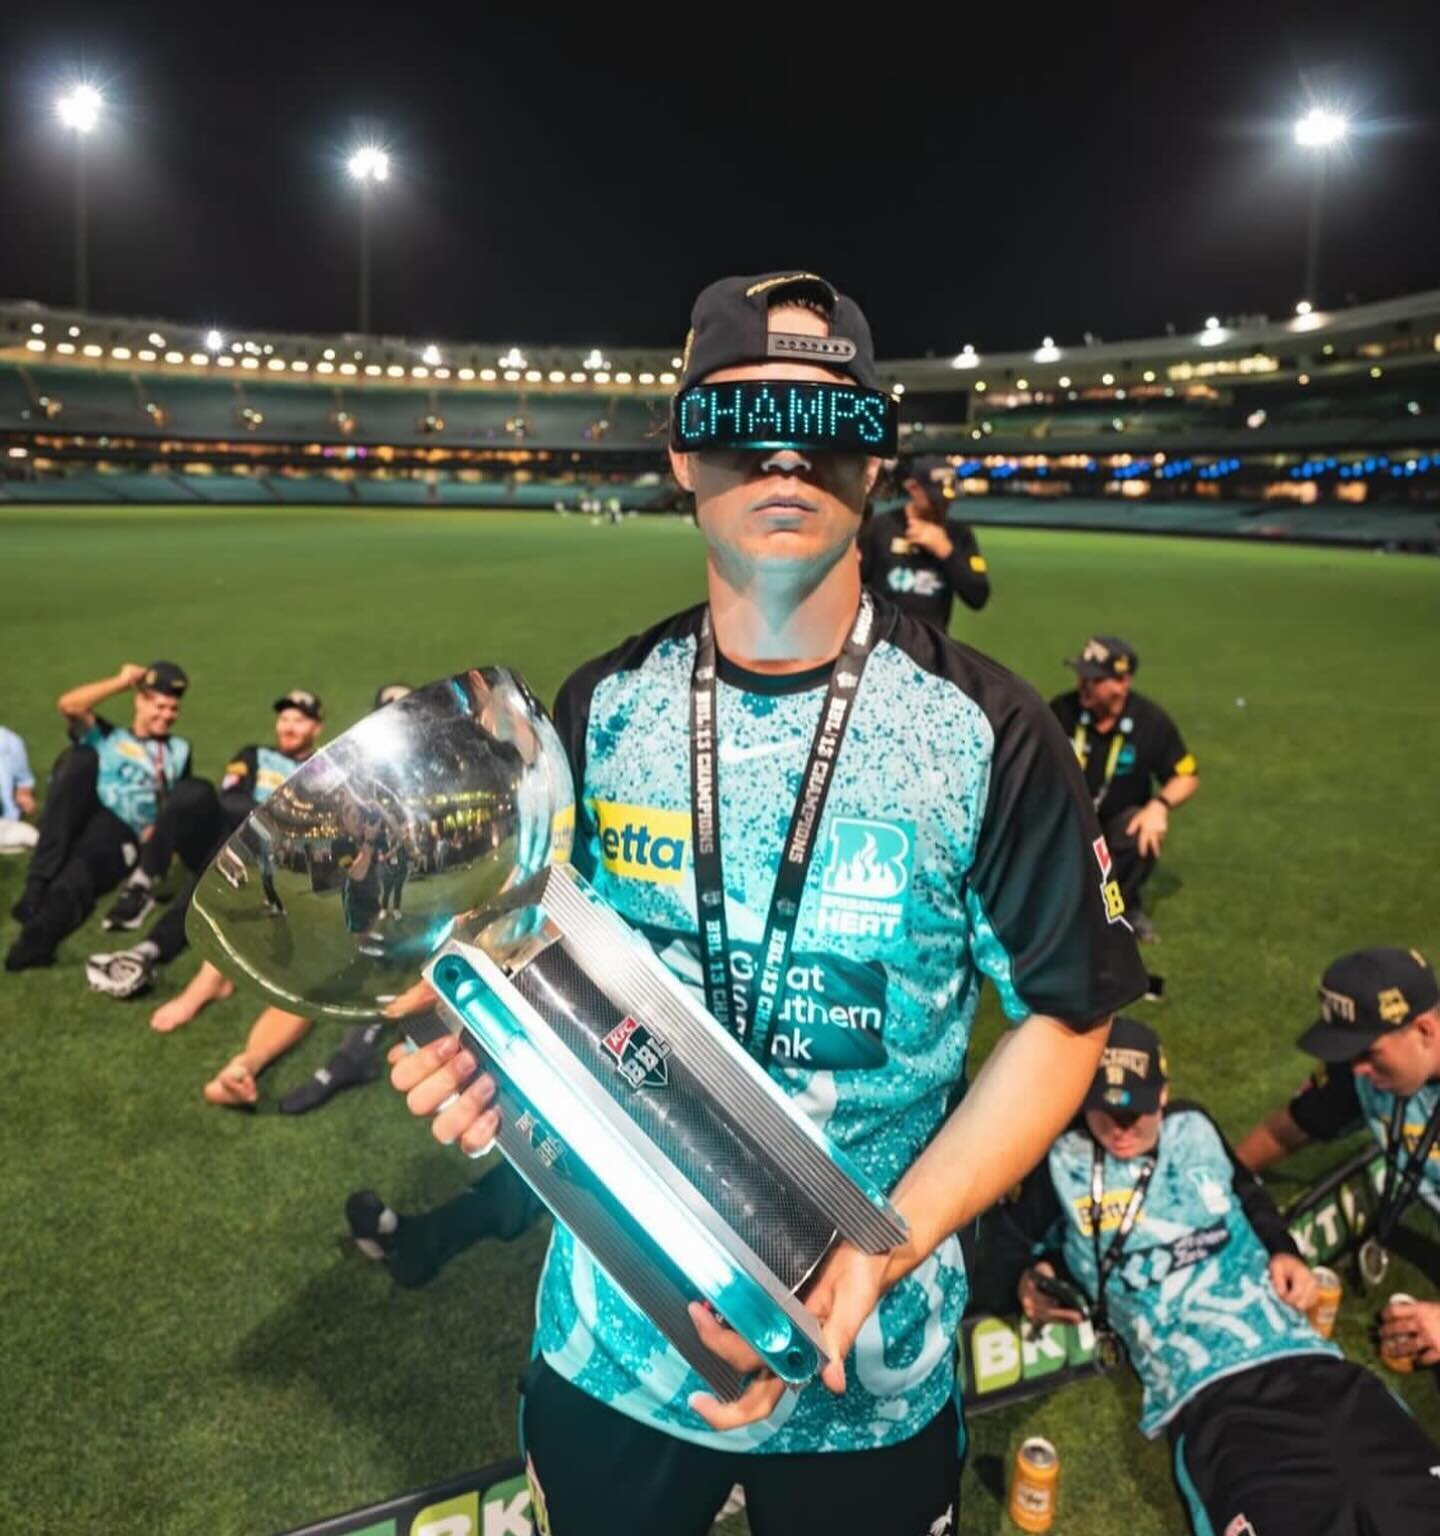 The Big Bash League trophy brilliantly lights up in the winning teams colors, demonstrating how sports properties can leverage colors to create new value and experiences for players and fans.